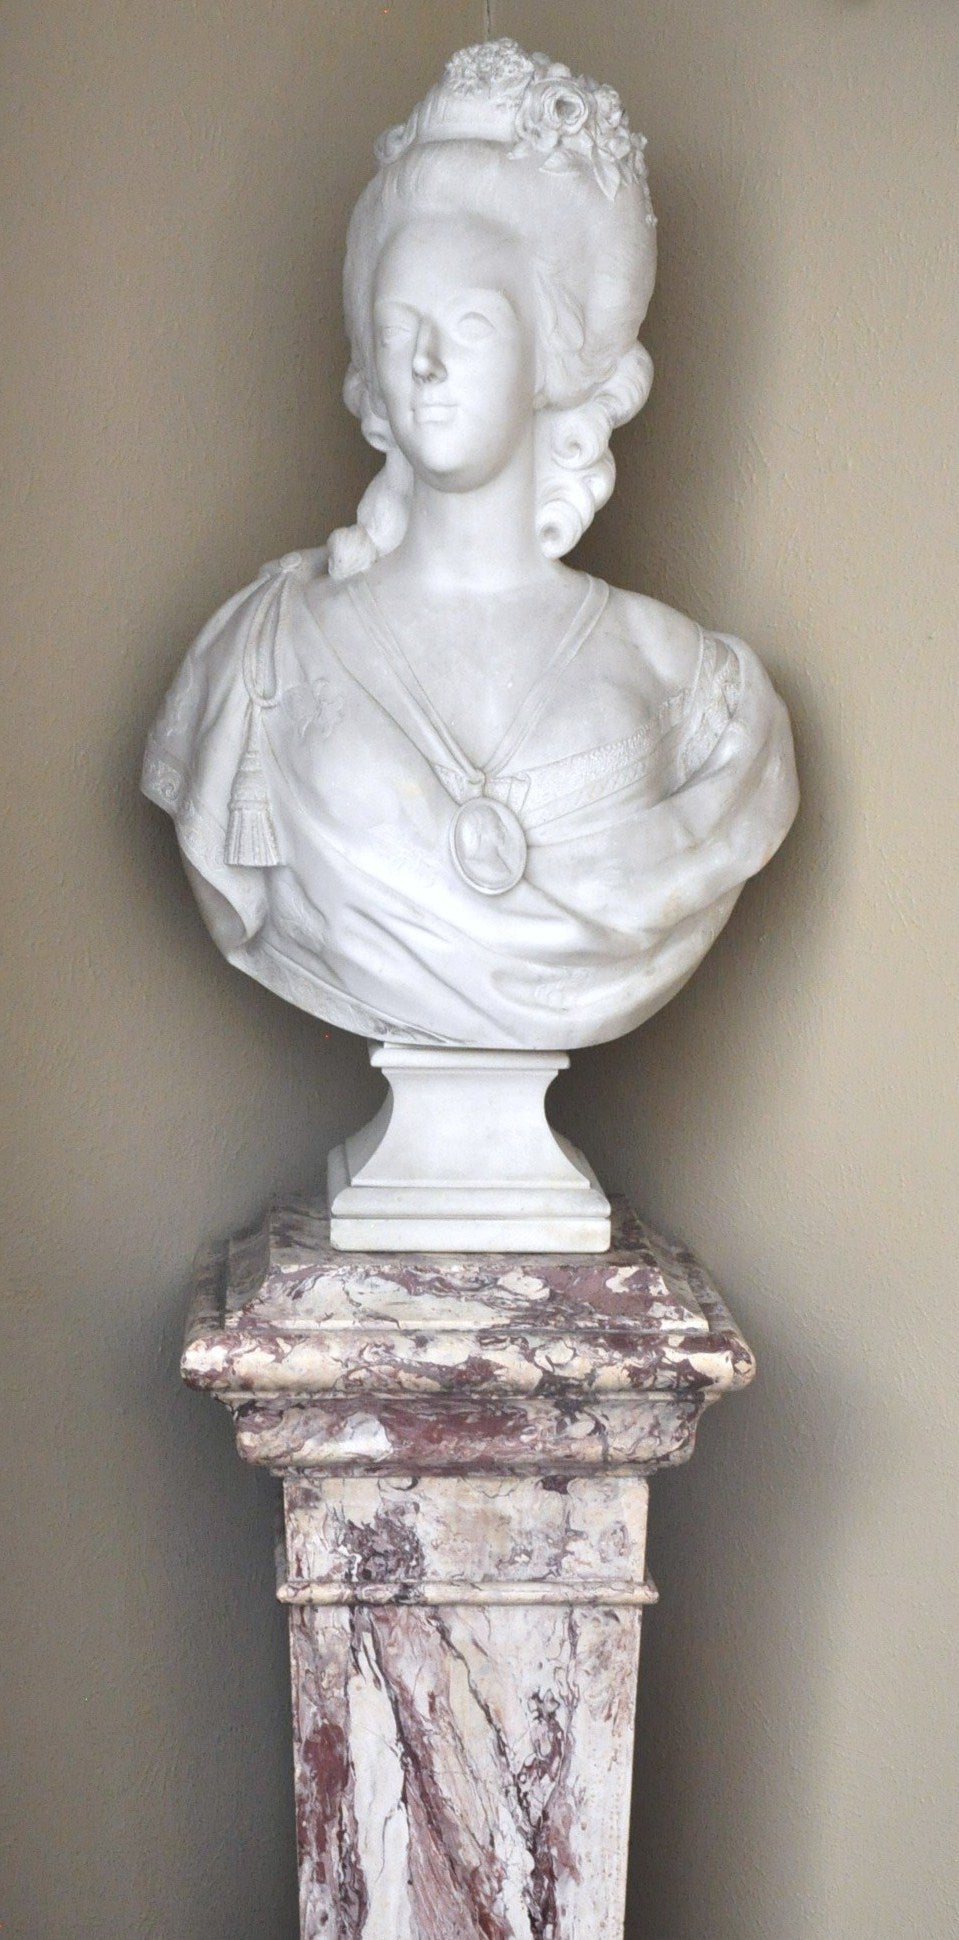 This important antique bust of Marie Antoinette was sculpted in Paris, France, circa 1780. Built of white Carrara marble, and crafted in the style of Lecomte (French sculptor 1737-1817), the original inspiration of the bust was located in the